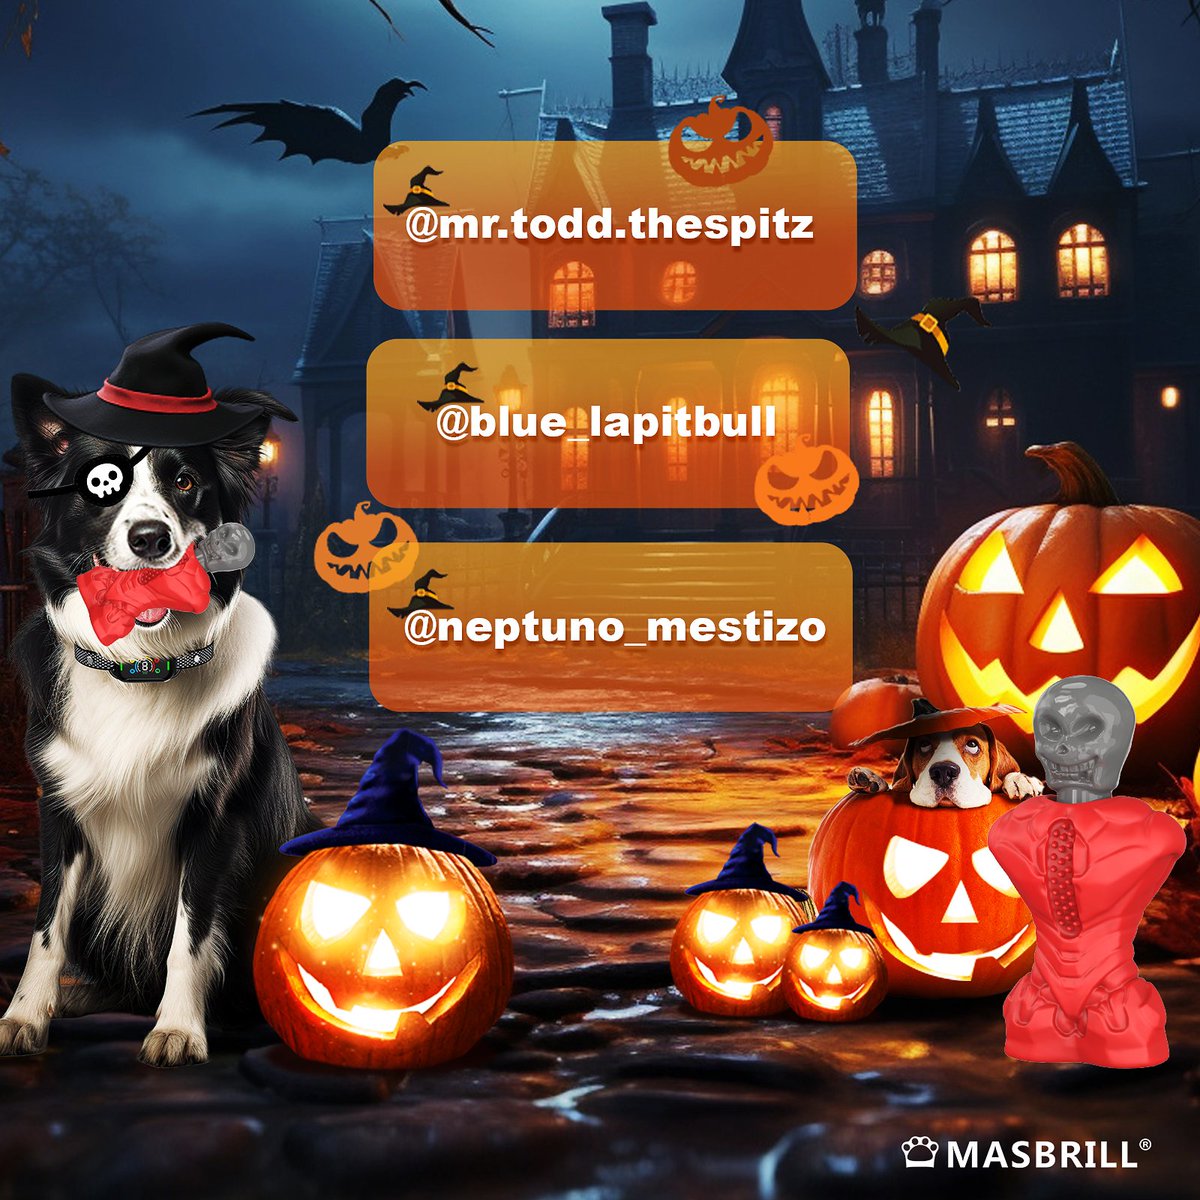 Happy Halloween!🎃🎃🎃🎃
Congratulations to these three friends on getting our Halloween treats!💐💐💐
masbrill.us
#dog #HalloweenGiveaway #WinPrizes #DogChewToy #MasbrillToy #HalloweenGifts #HalloweenFun #DogLovers #GiftsForPets #PetToys  #Masbrill #dogs